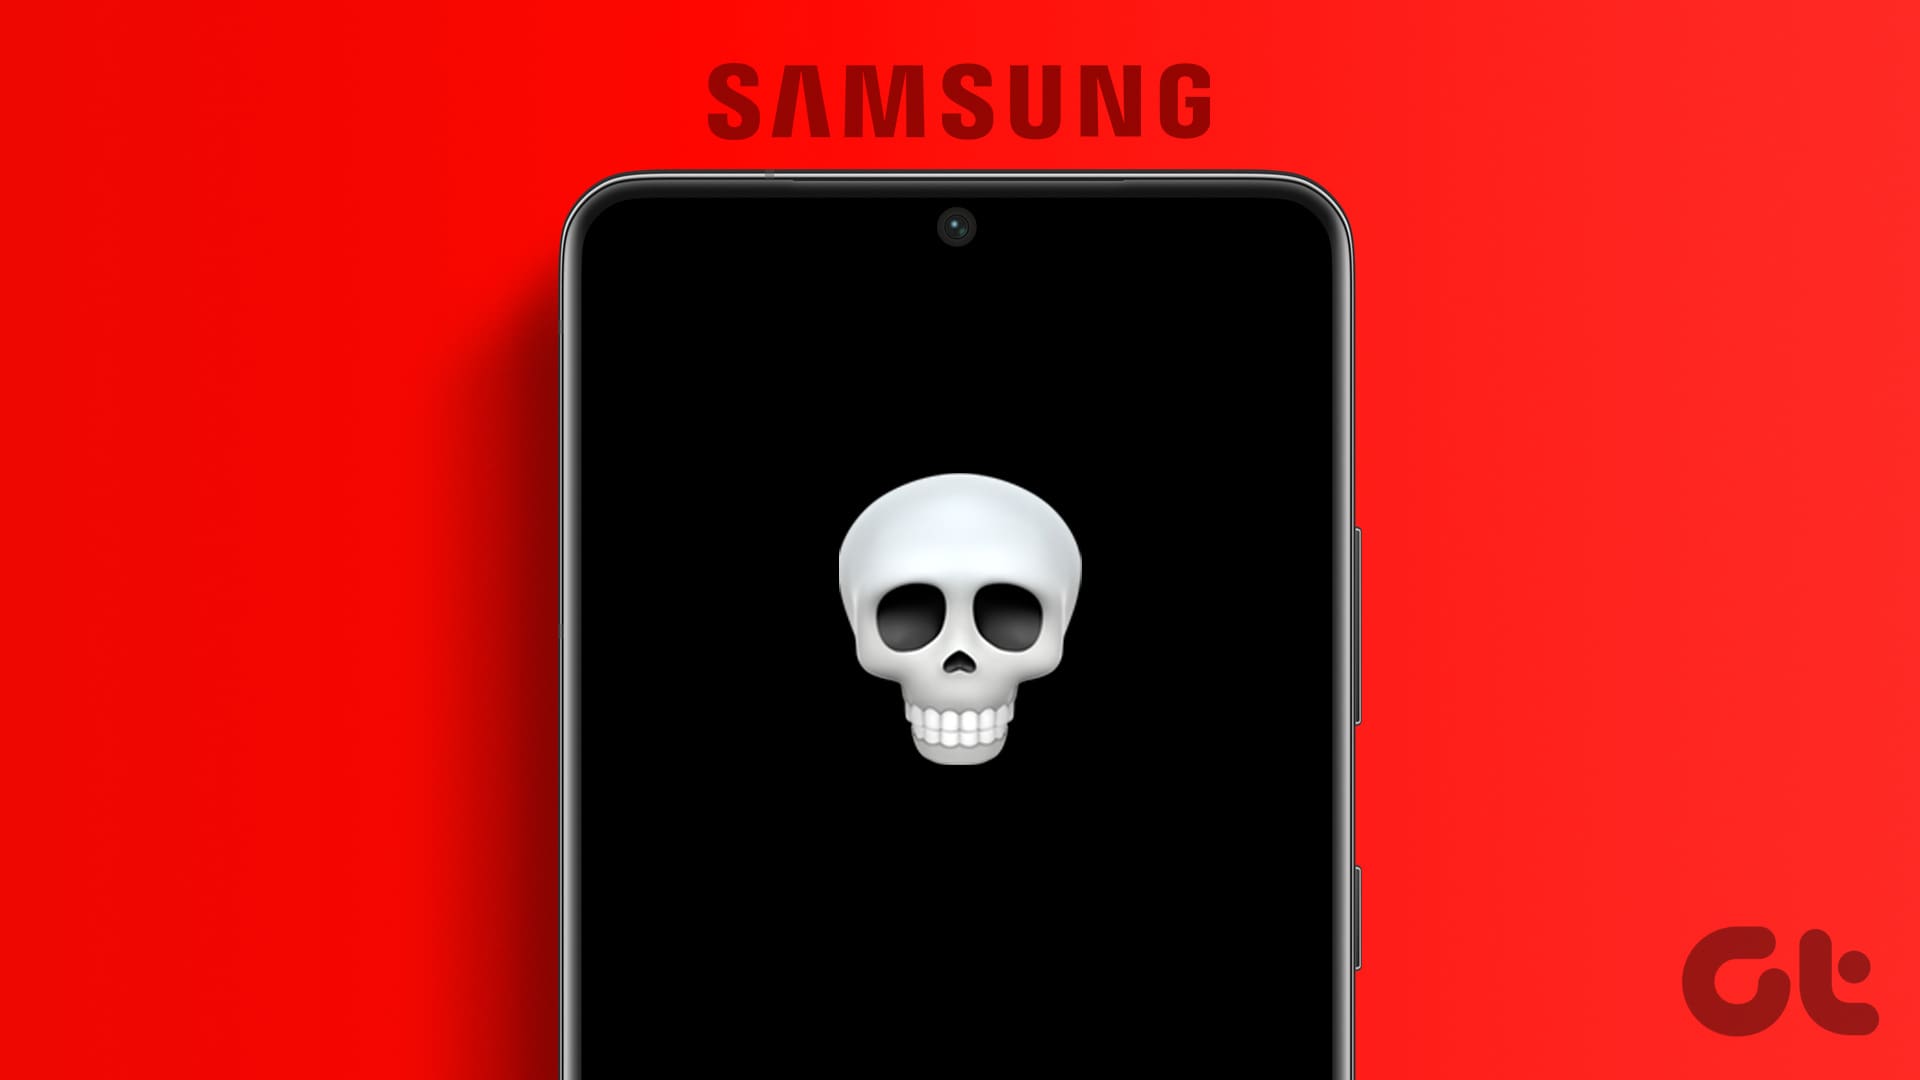 Top Fixes for Black Screen of Death on Samsung Galaxy Phone